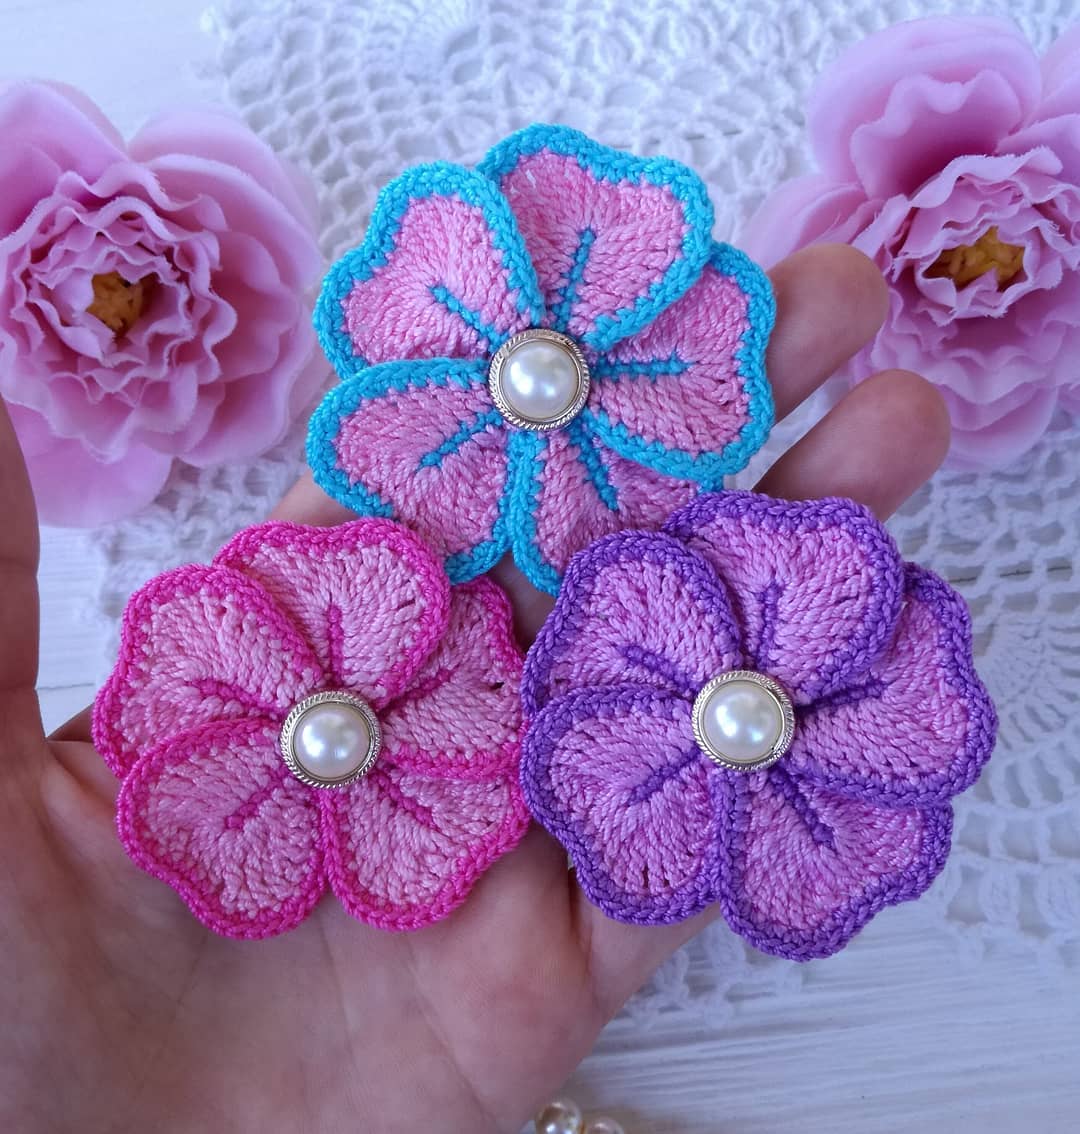 easy-and-cute-free-crochet-flowers-pattern-image-ideas-for-new-season-2019-page-14-of-36